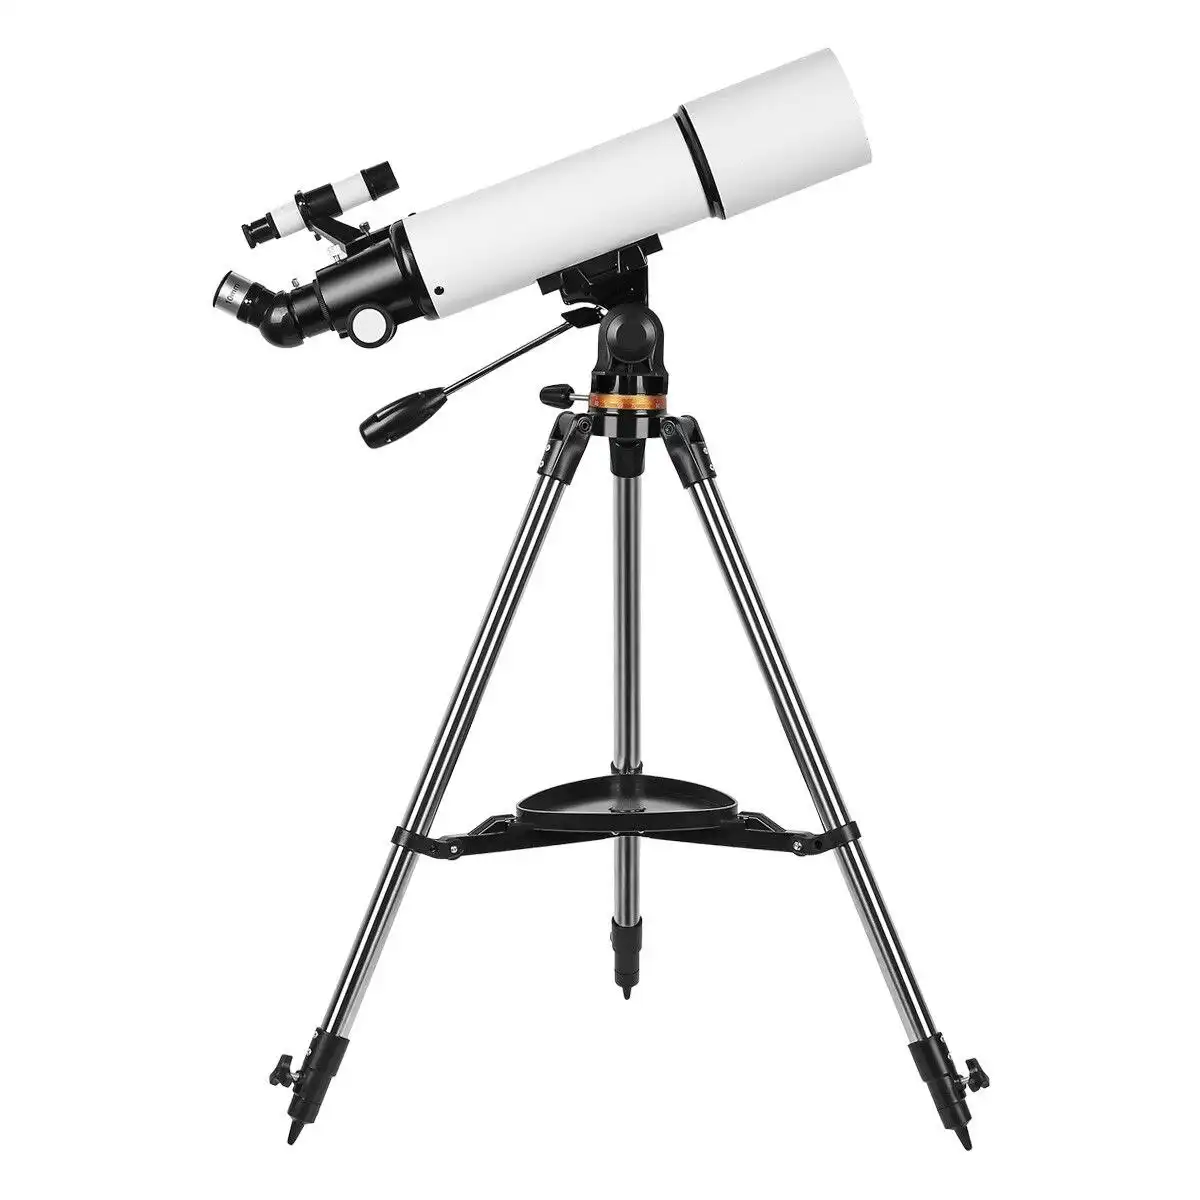 Ausway Astronomical Space Telescope 50080 Outdoor Monocular with Tripod and Phone Adapter